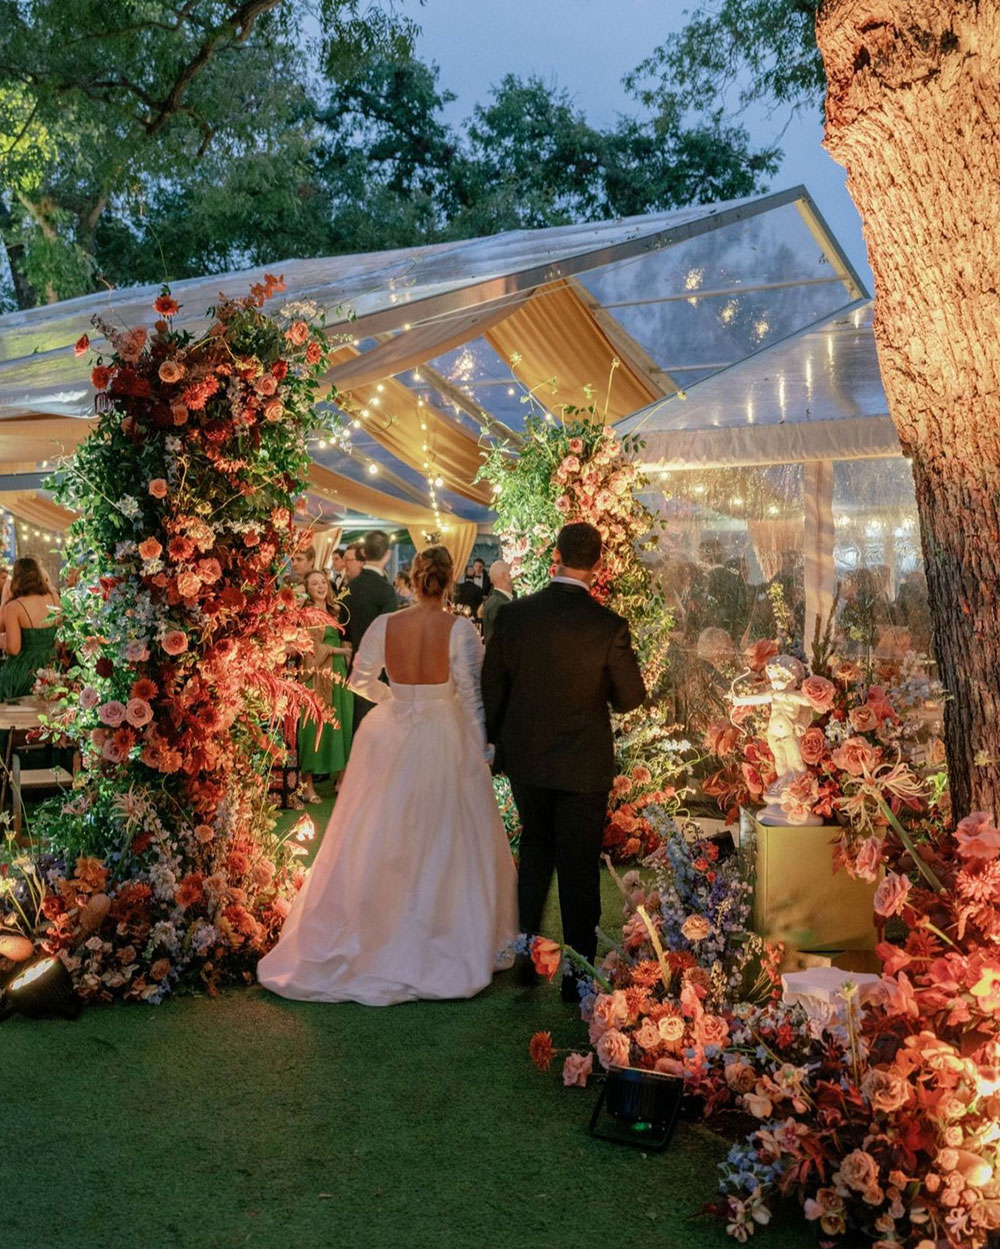 12 gorgeous Texas wedding venues from barns to restaurants to historic homes